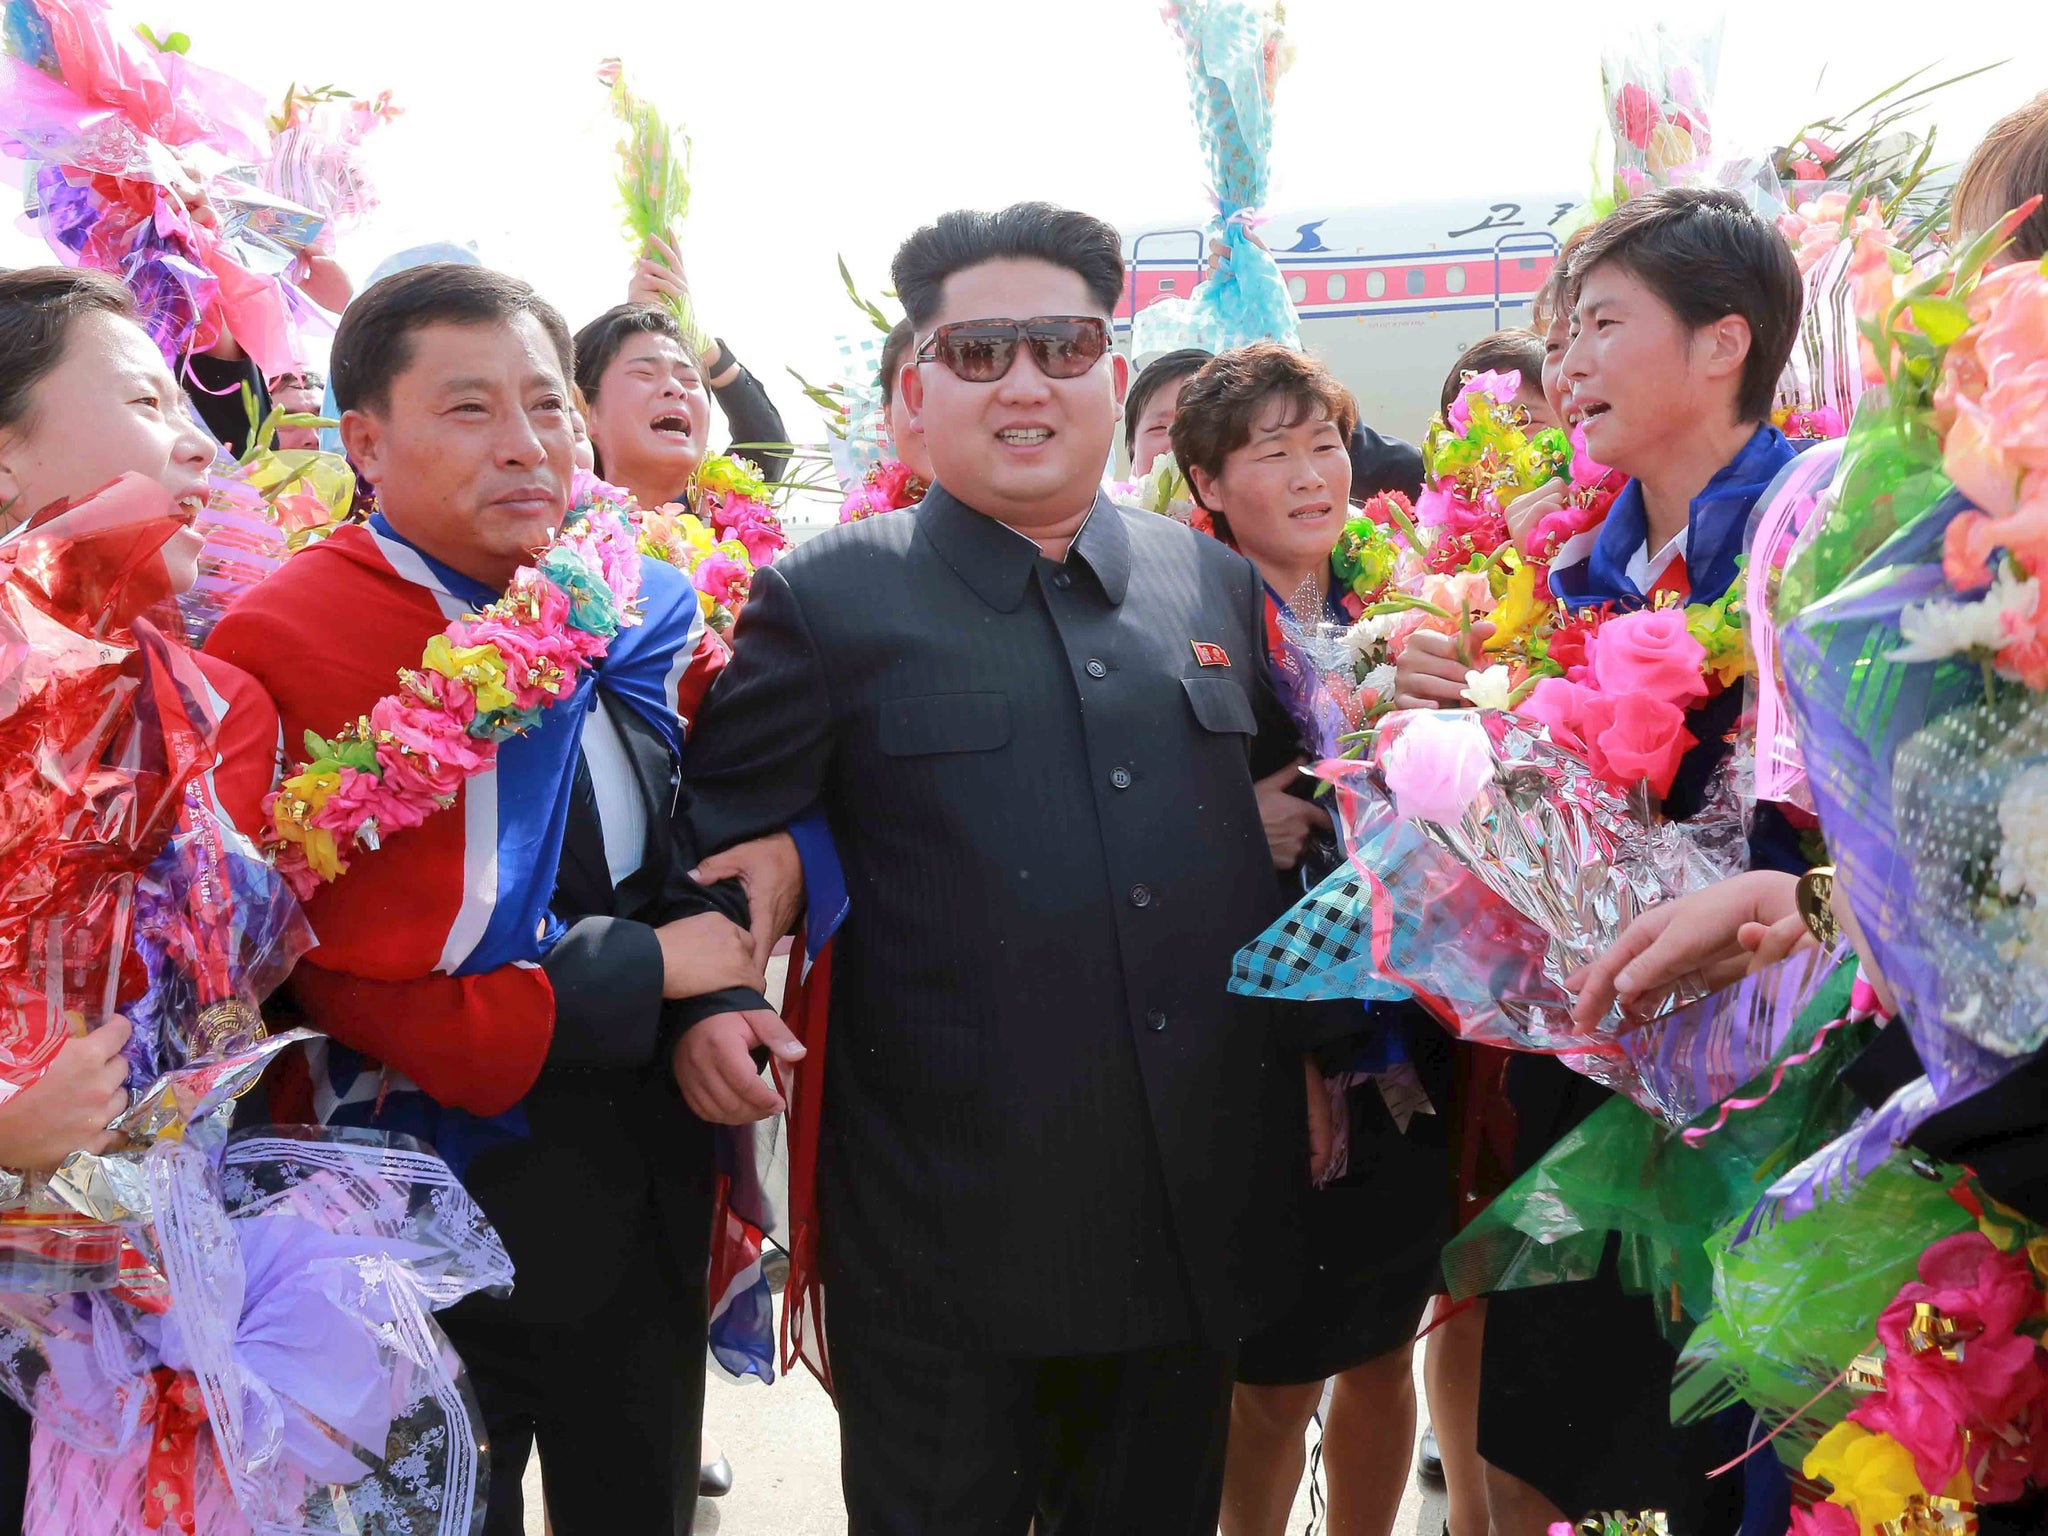 North Korea is notoriously cautious about letting tourists into the country